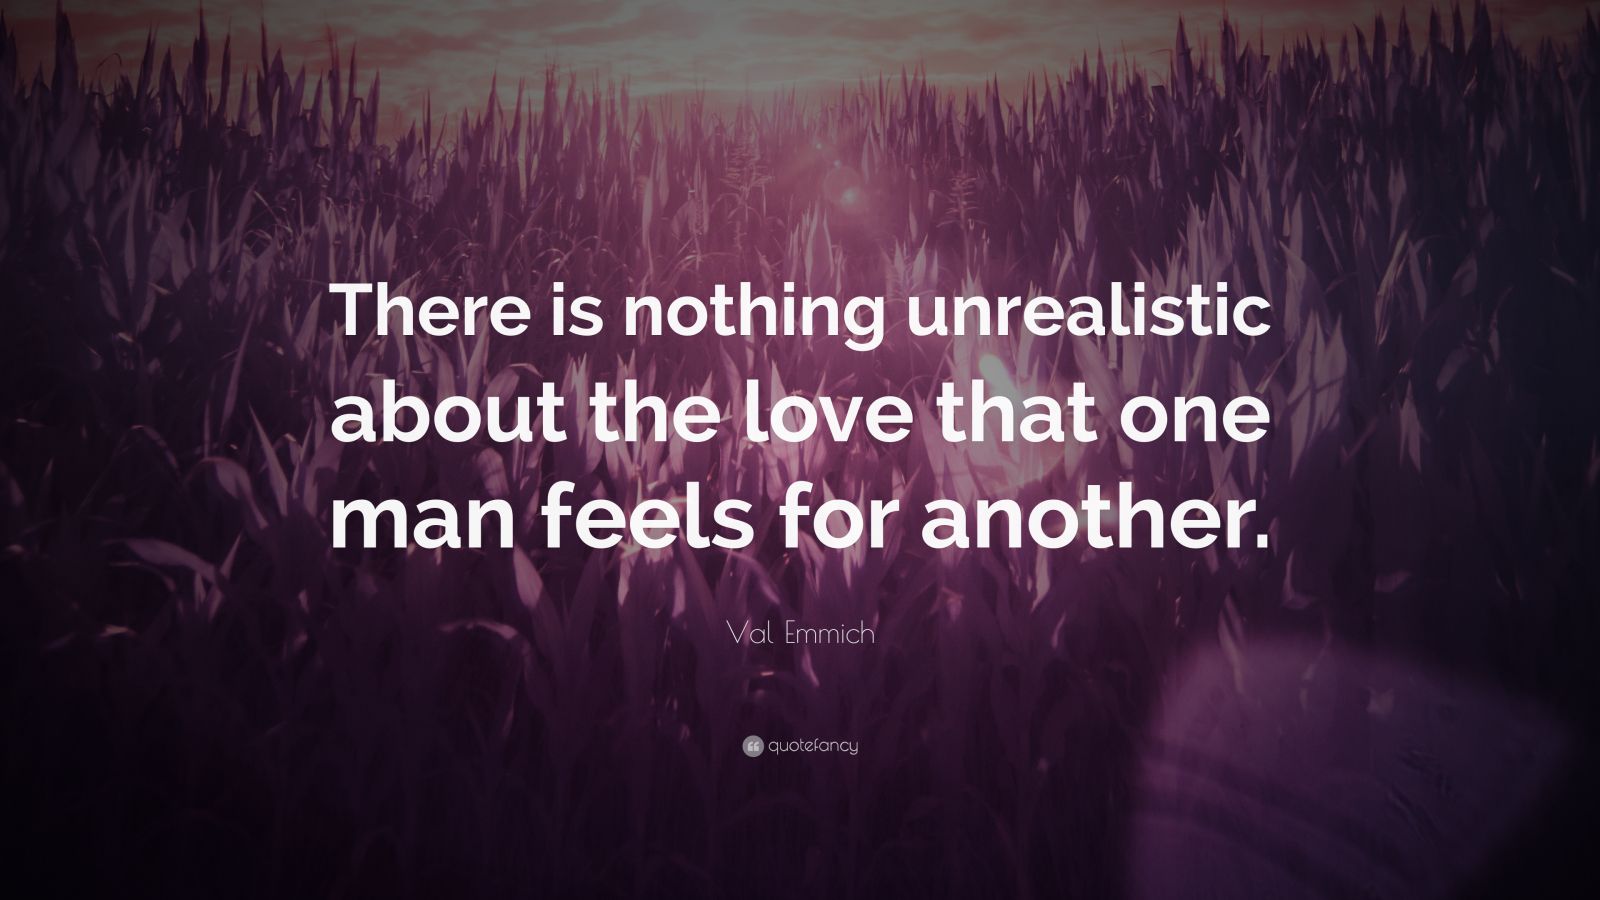 Val Emmich Quote: “There is nothing unrealistic about the love that one ...